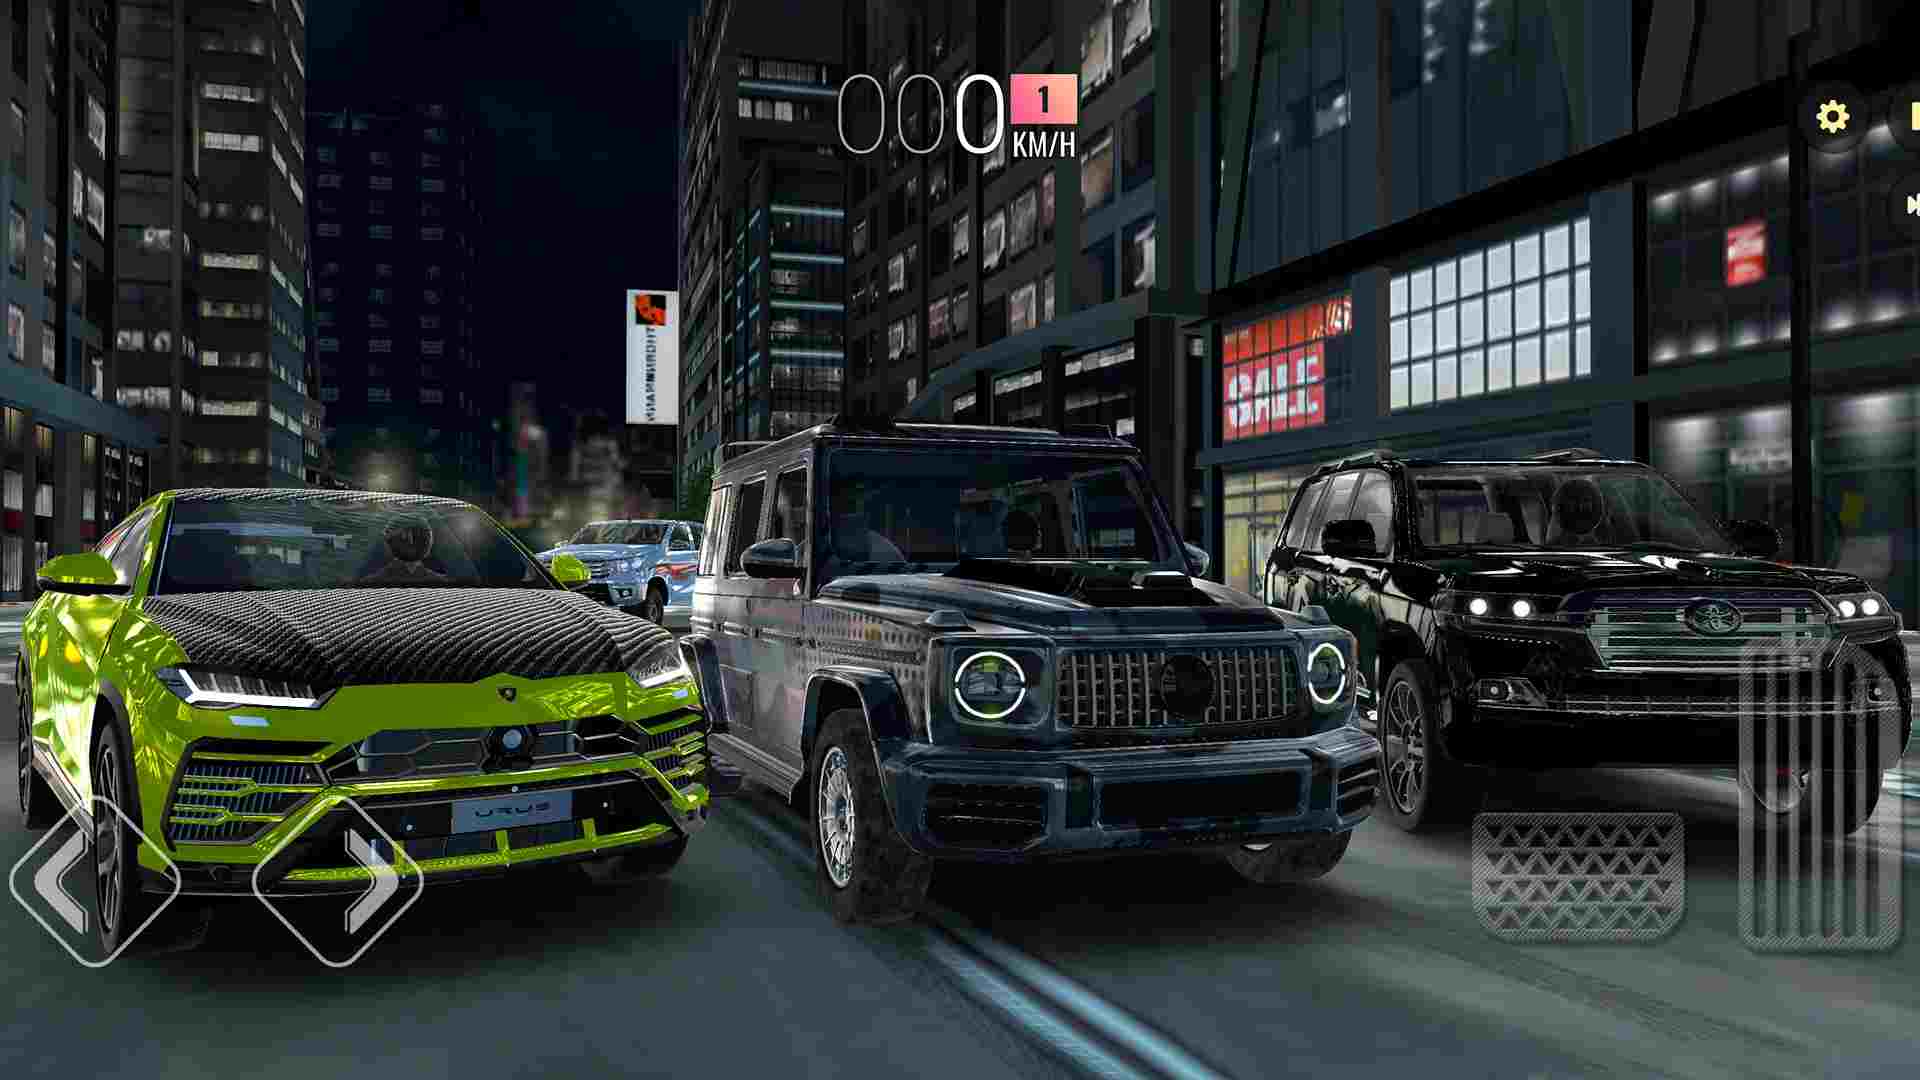 Racing in car multiplayer. Фото игры Racing in car 2021. Racing in car 2022 в злом мультиплеер. Мультиплеер в рейсинг ин кар 2021. Tojgames.